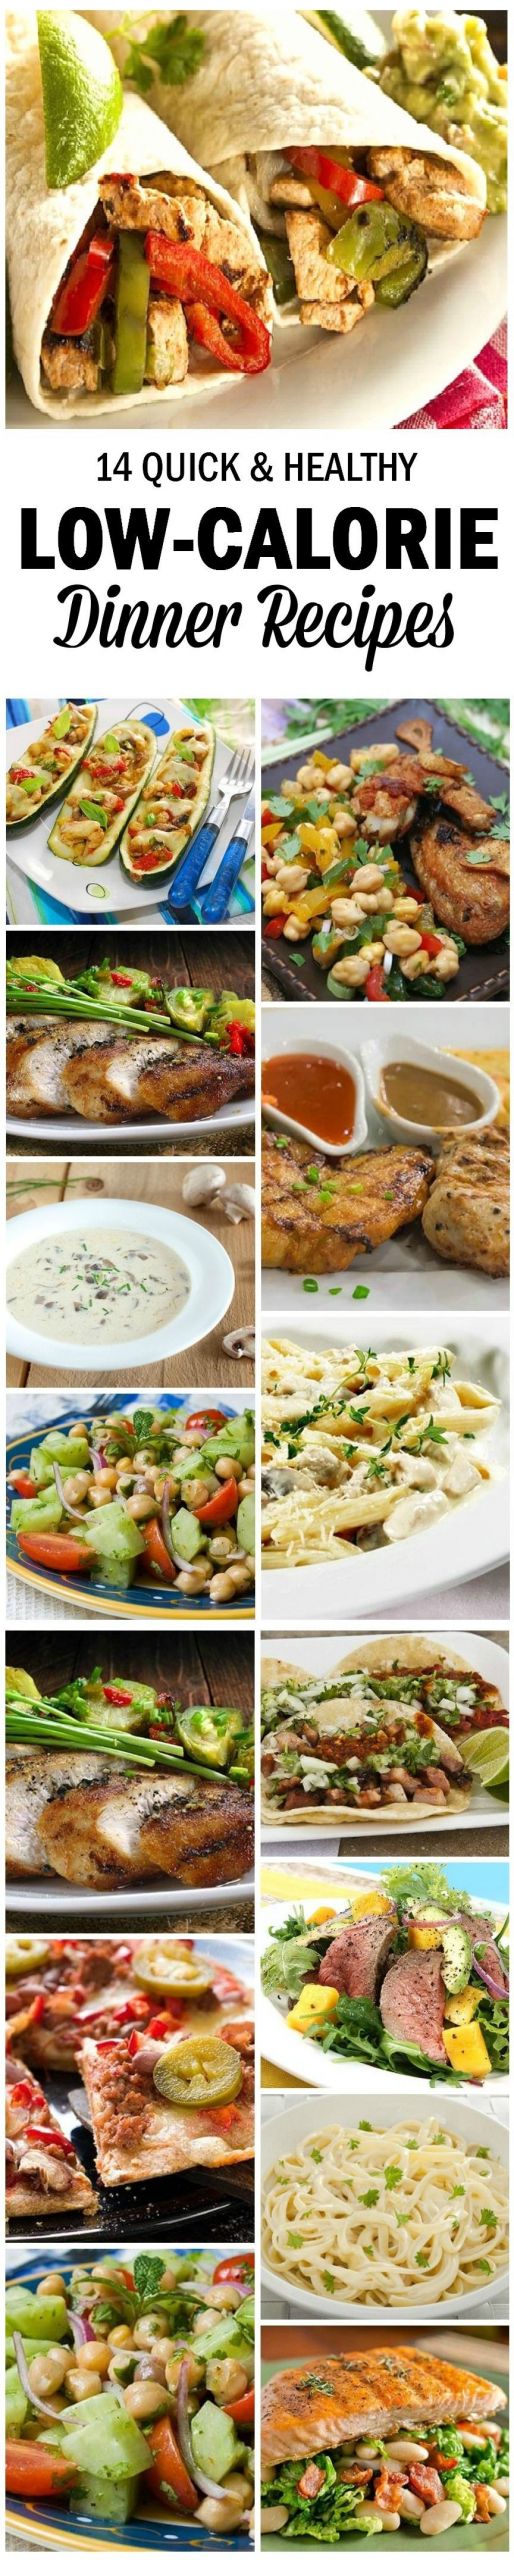 Quick Low Calorie Dinners
 20 Quick And Healthy Low Calorie Dinner Recipes